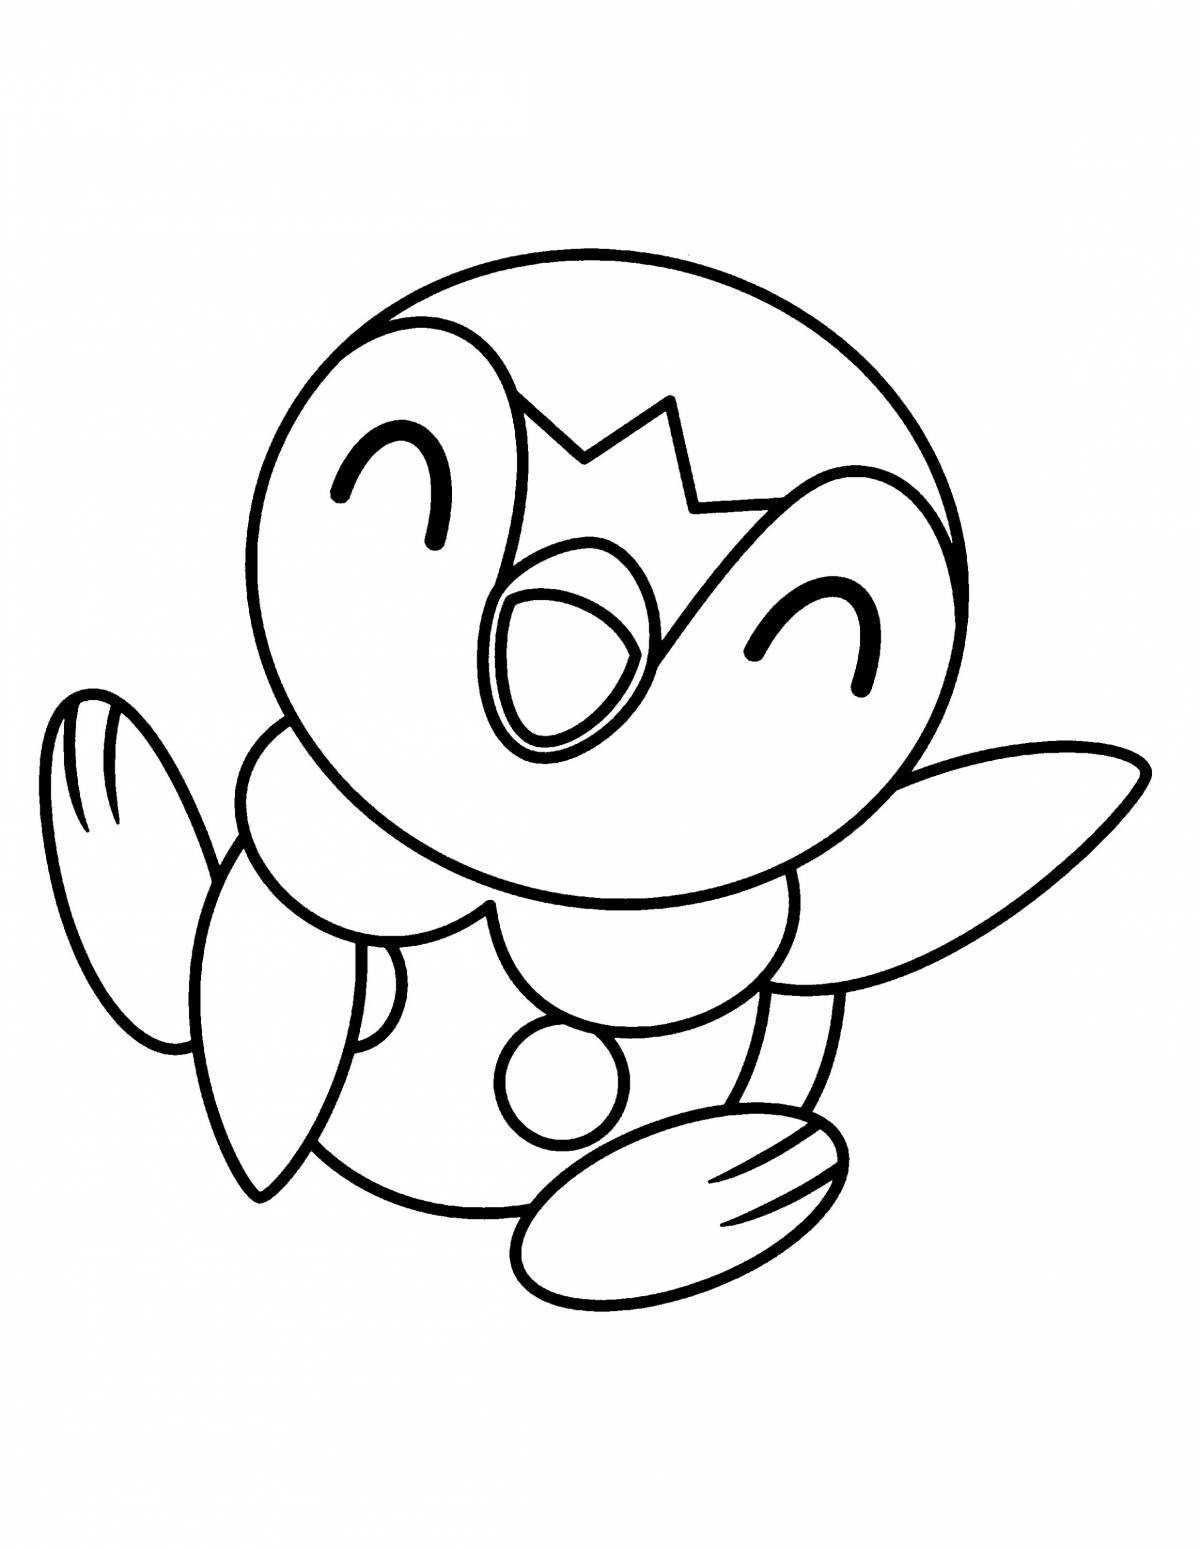 Coloring page glorious piplup pokemon